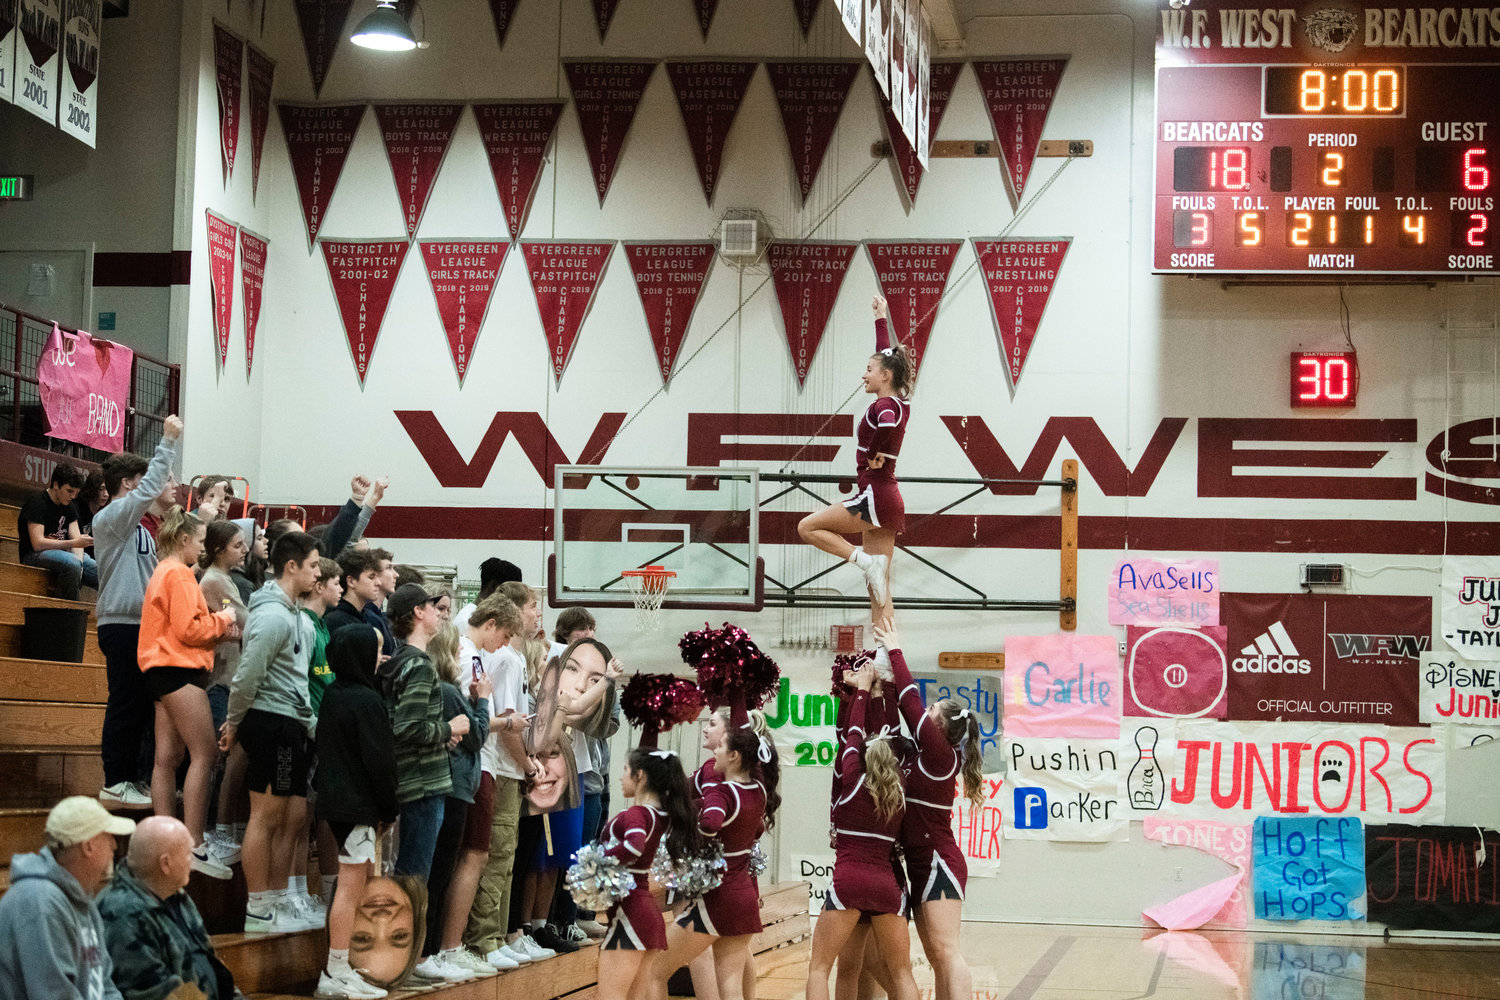 Bearcat fans celebrate the lead during a game against Rochester in Chehalis Thursday night.